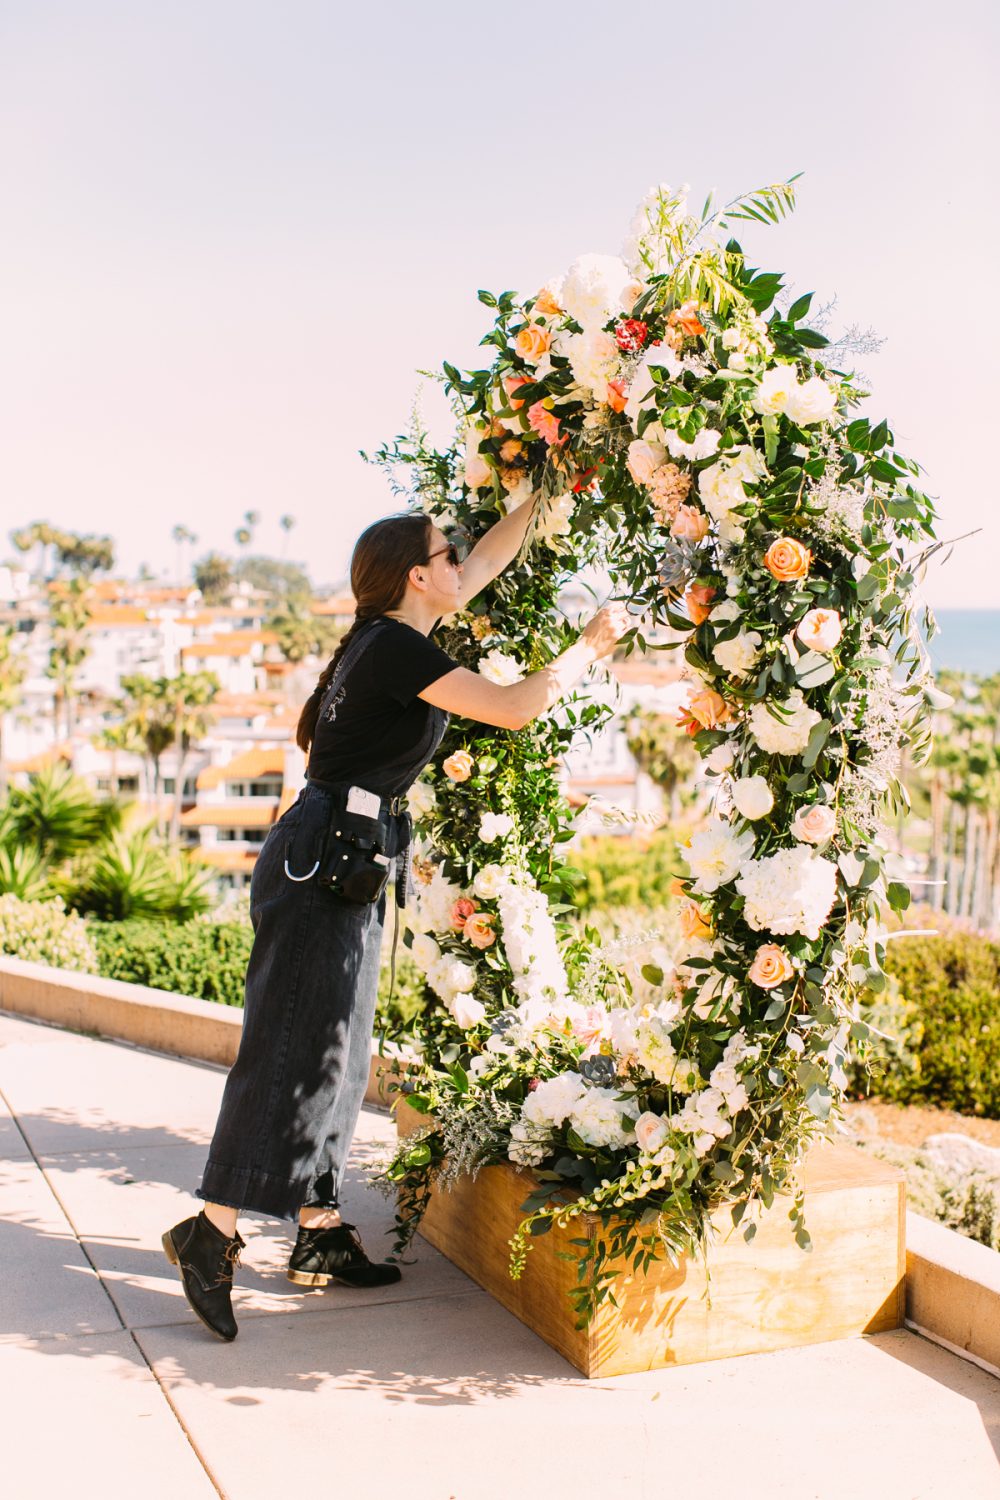 The Bloom Of time florals working on floral arch at case romantic